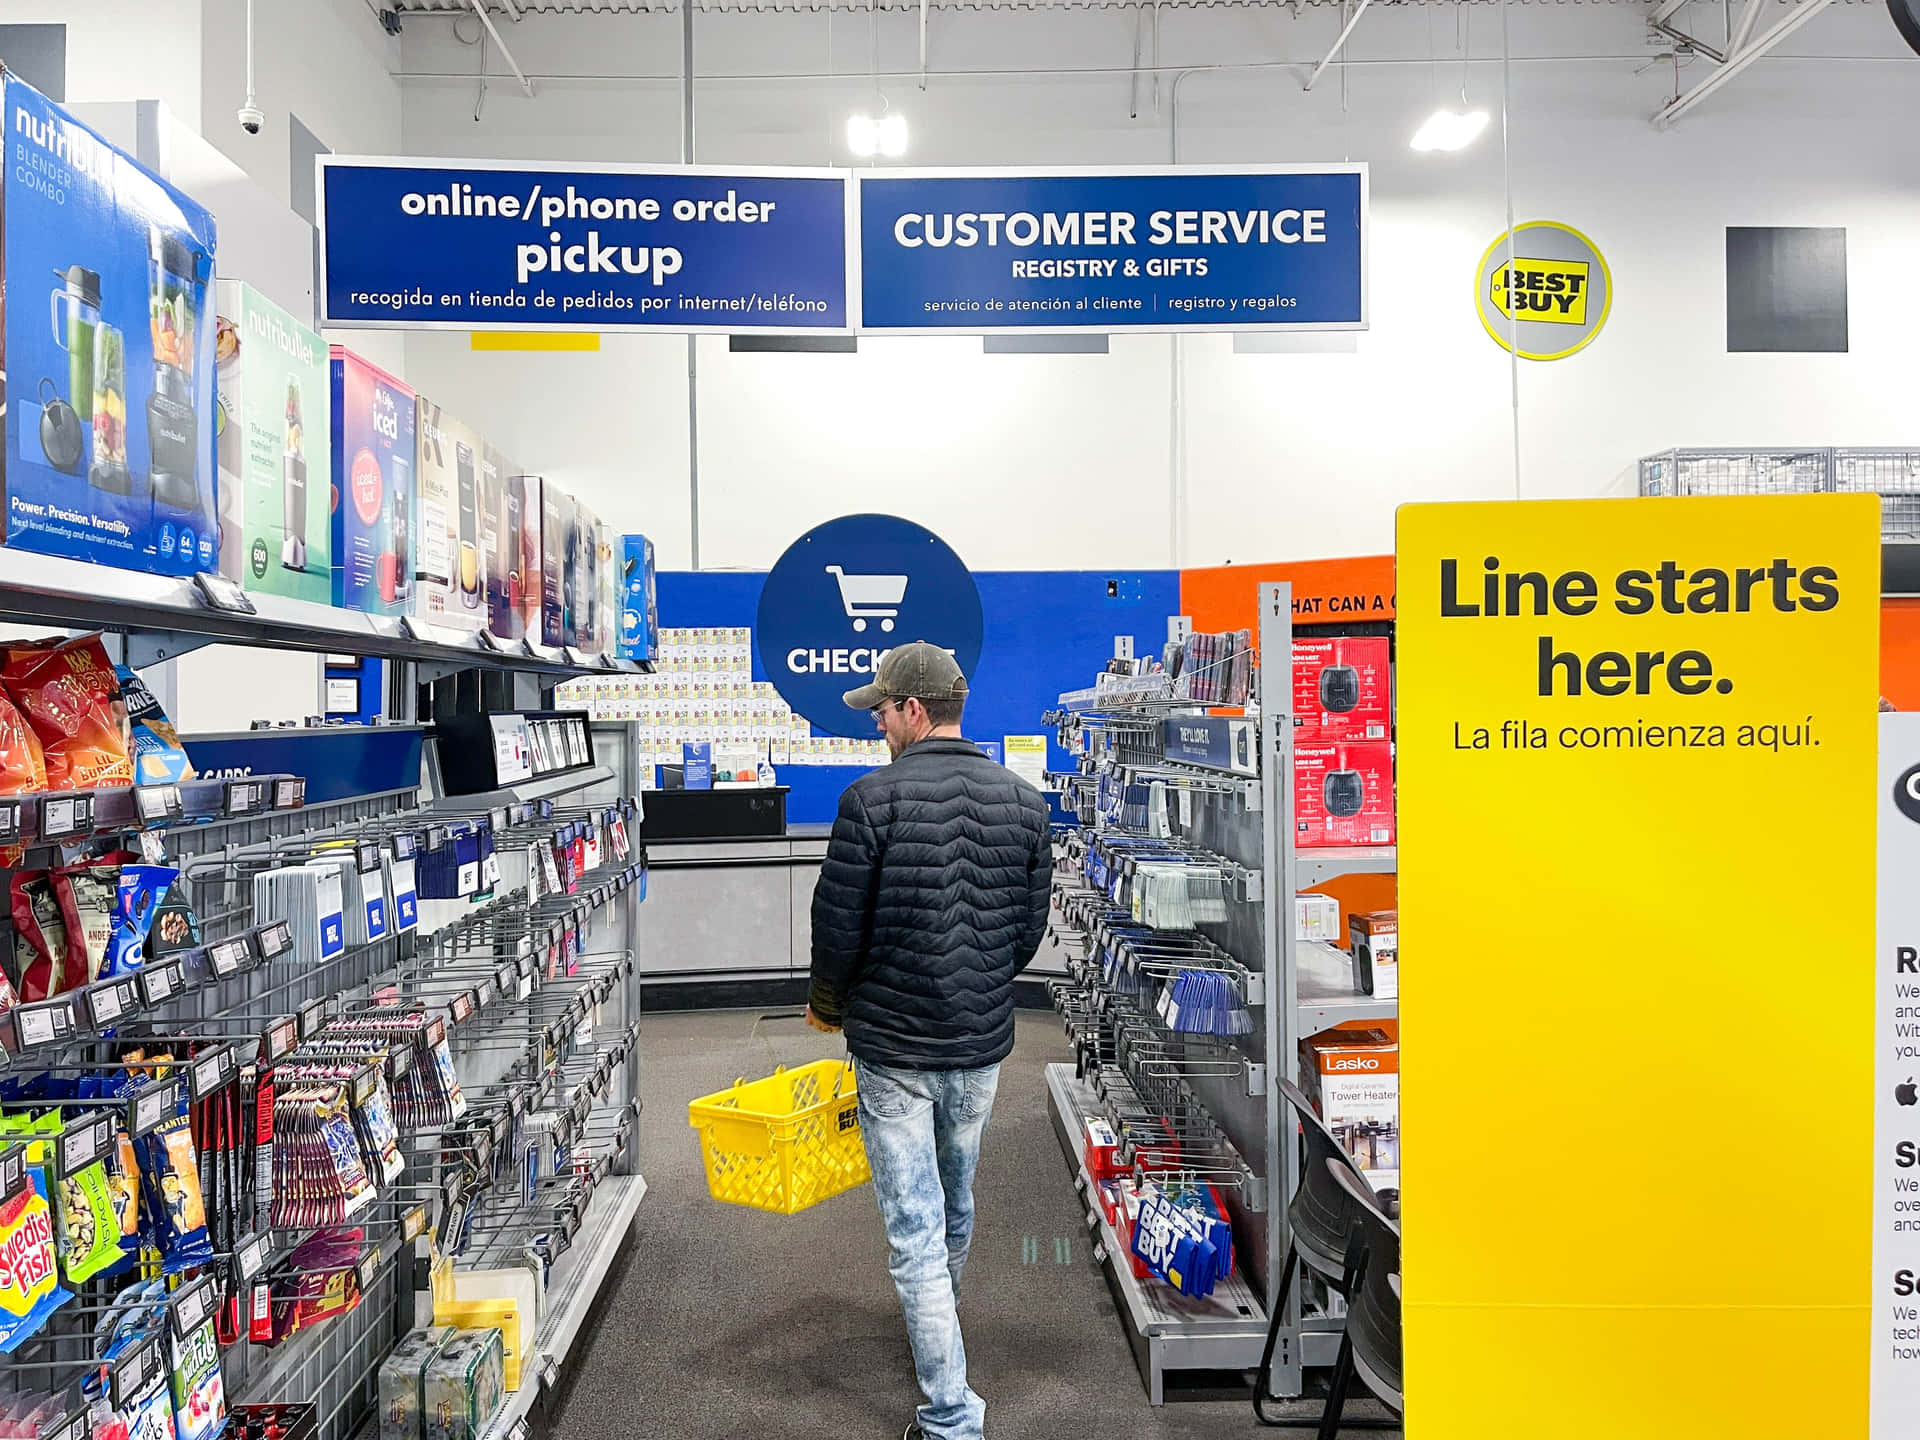 The Future of Shopping is at Best Buy